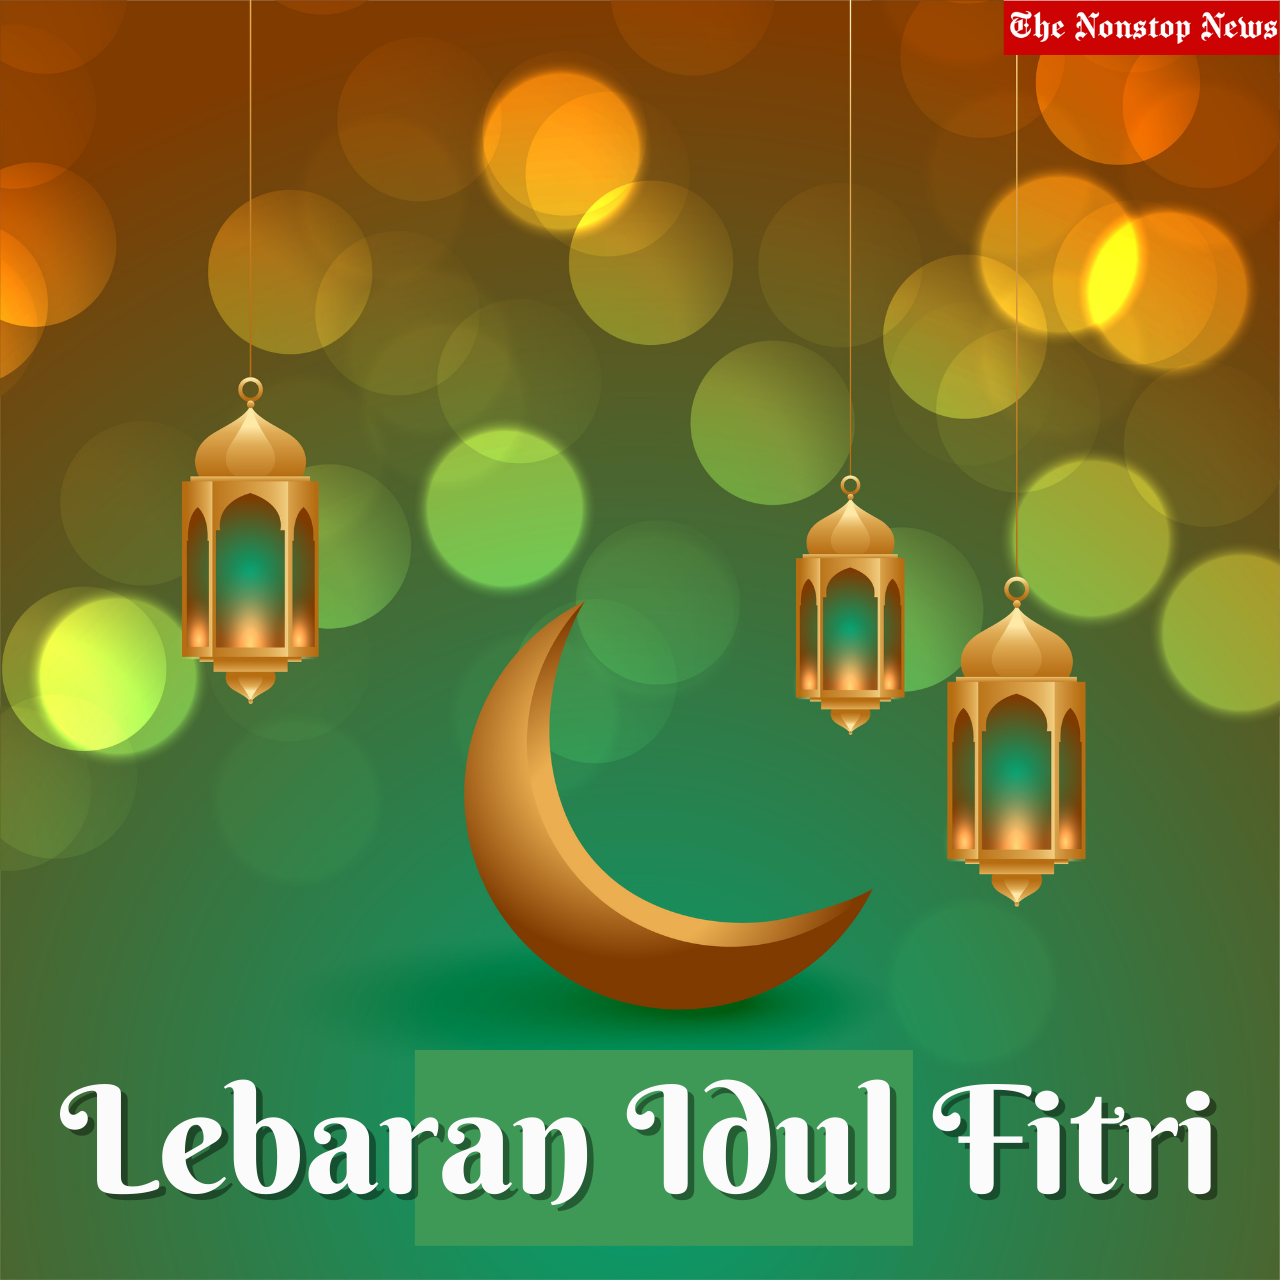 Lebaran Idul Fitri 2023 Indonesian Wishes, Images, Quotes, Messages, Greetings, Sayings, Posters, Captions, Banners, and Cliparts